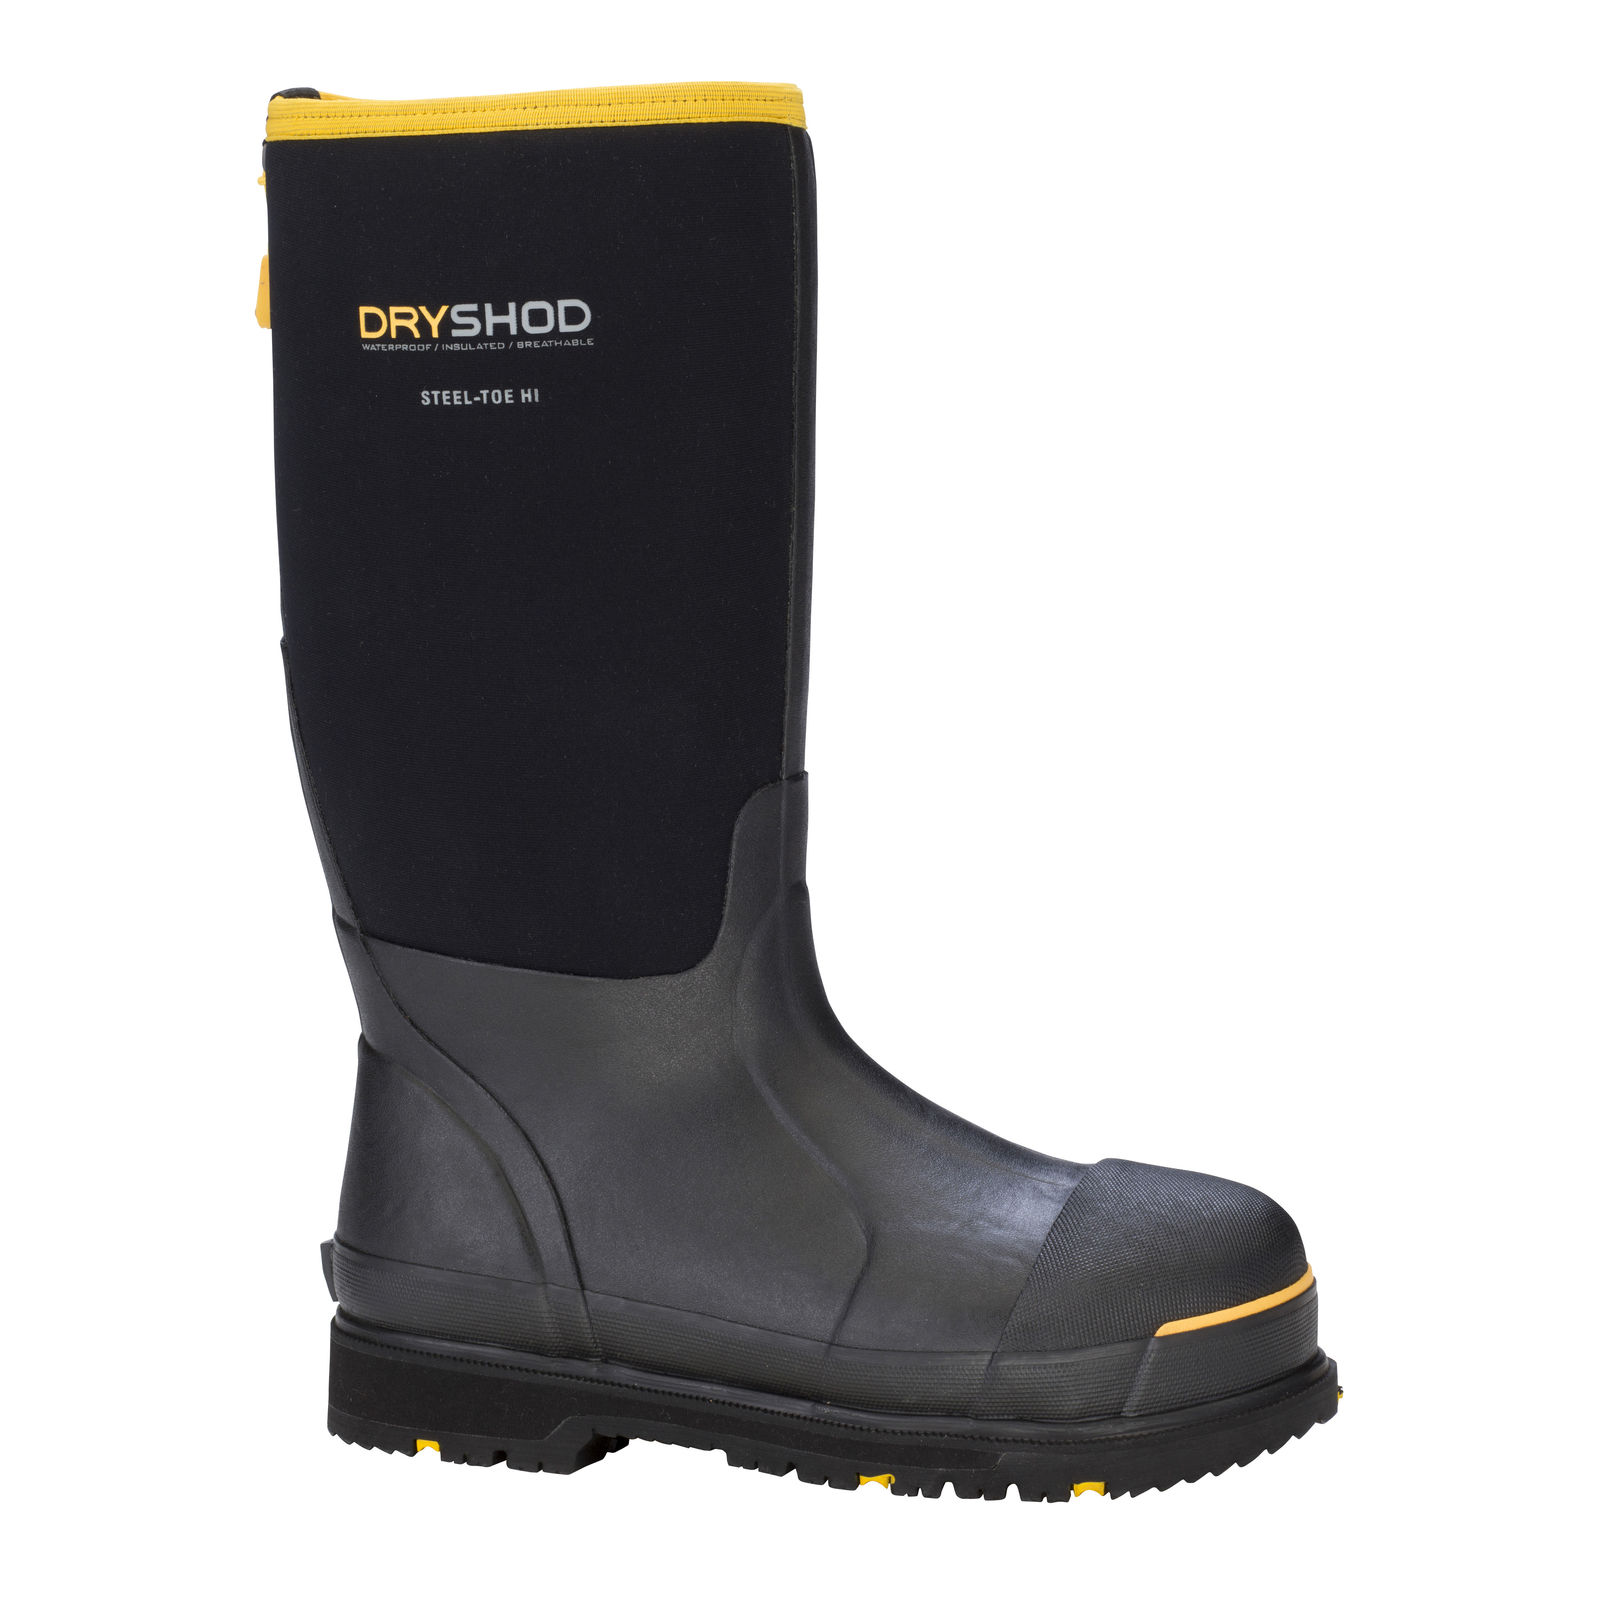 Primary image for Dryshod Steel Toe All Conditions Protective Boot STT-UH-BK All sizes